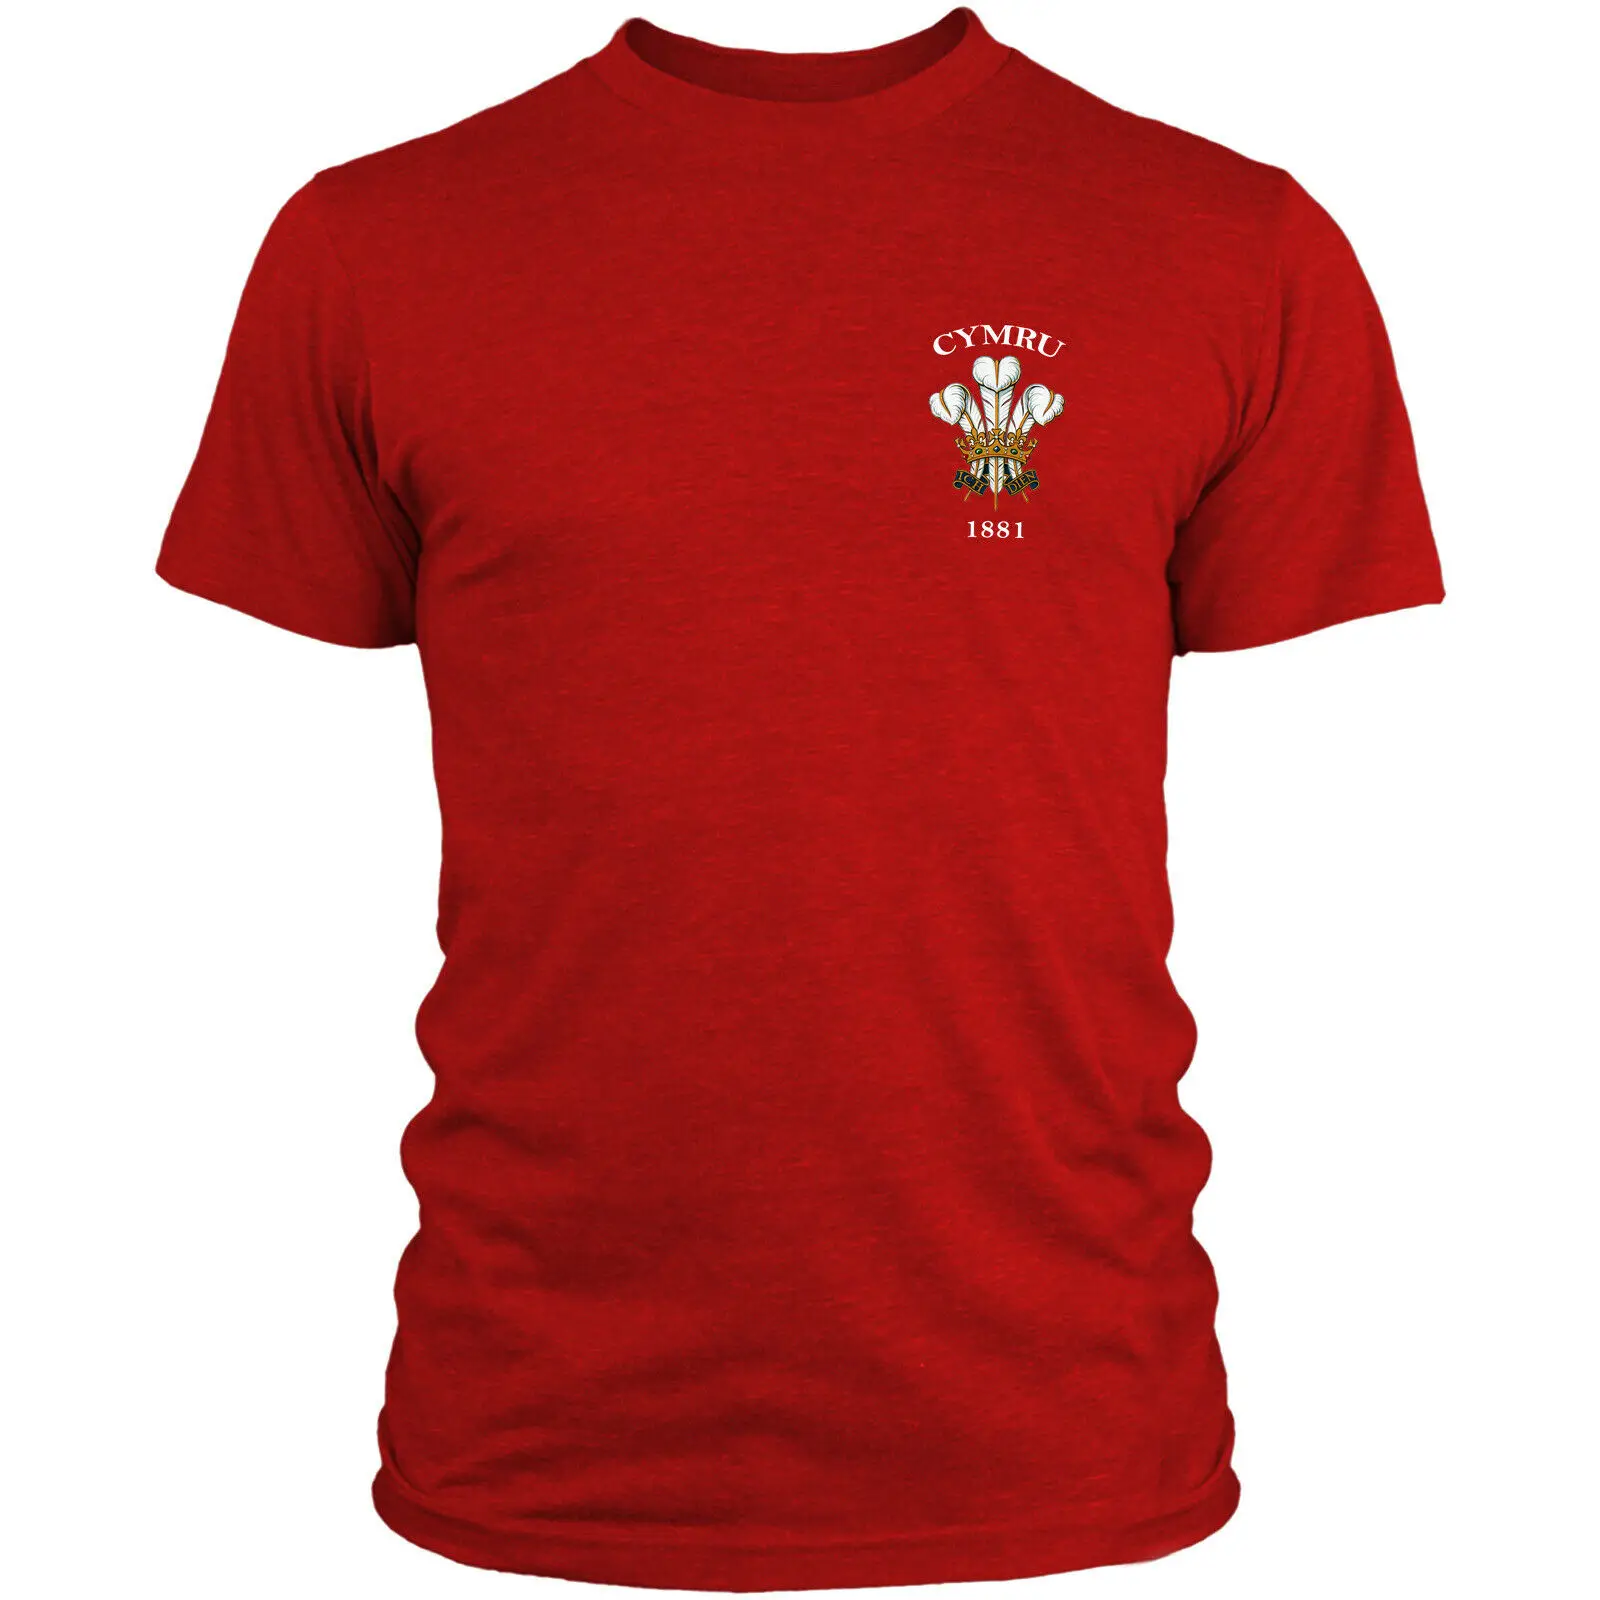 

Cymru Welsh Retro Rugby T Shirt Vintage Supporter Fan 6 Nations Top Men Wales L3 free shipping cheap tee,NEW ARRIVAL tees